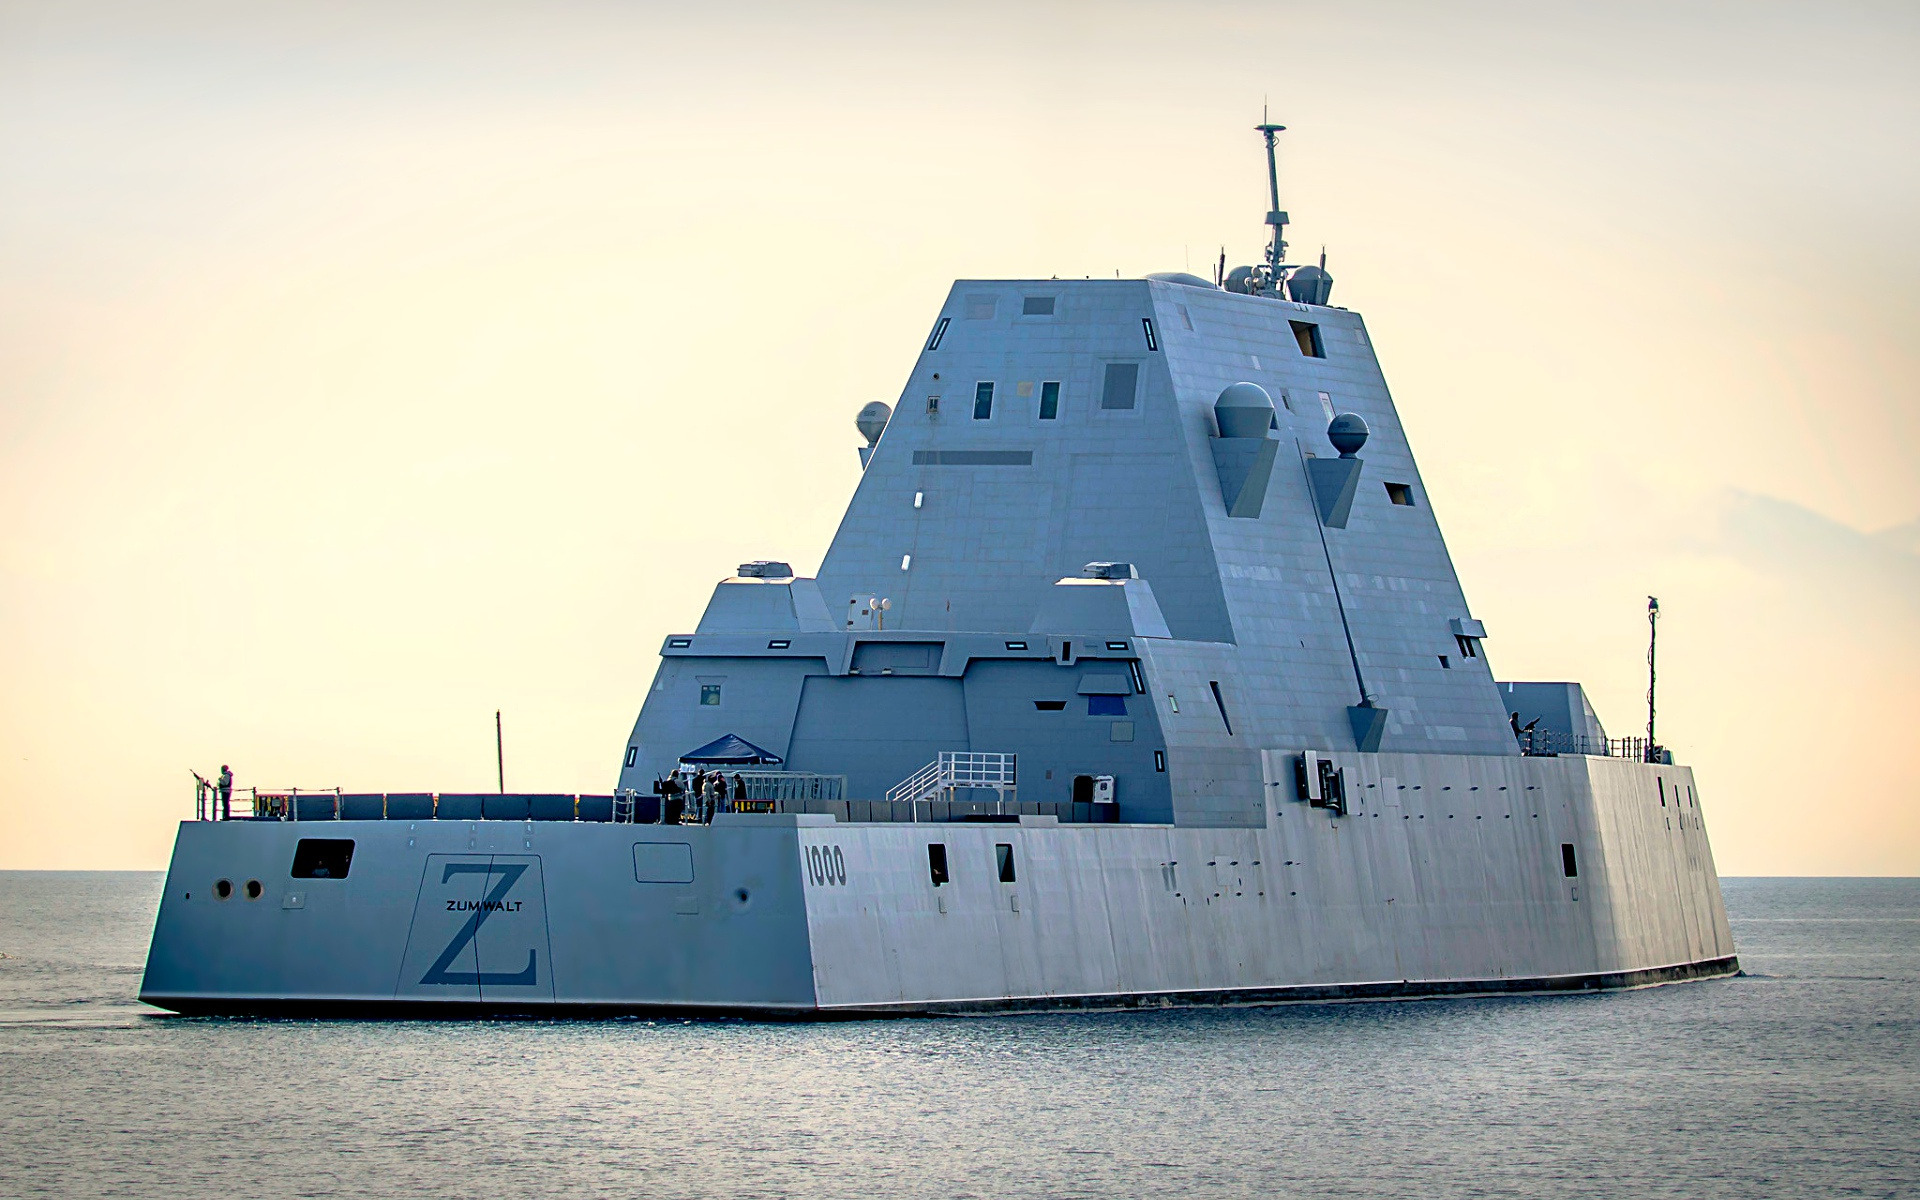 Download Wallpaper USS Zumwalt, DDG Guided Missile Destroyer, US Navy, Zumwalt Class Destroyer, American Warships, USA For Desktop With Resolution 1920x1200. High Quality HD Picture Wallpaper